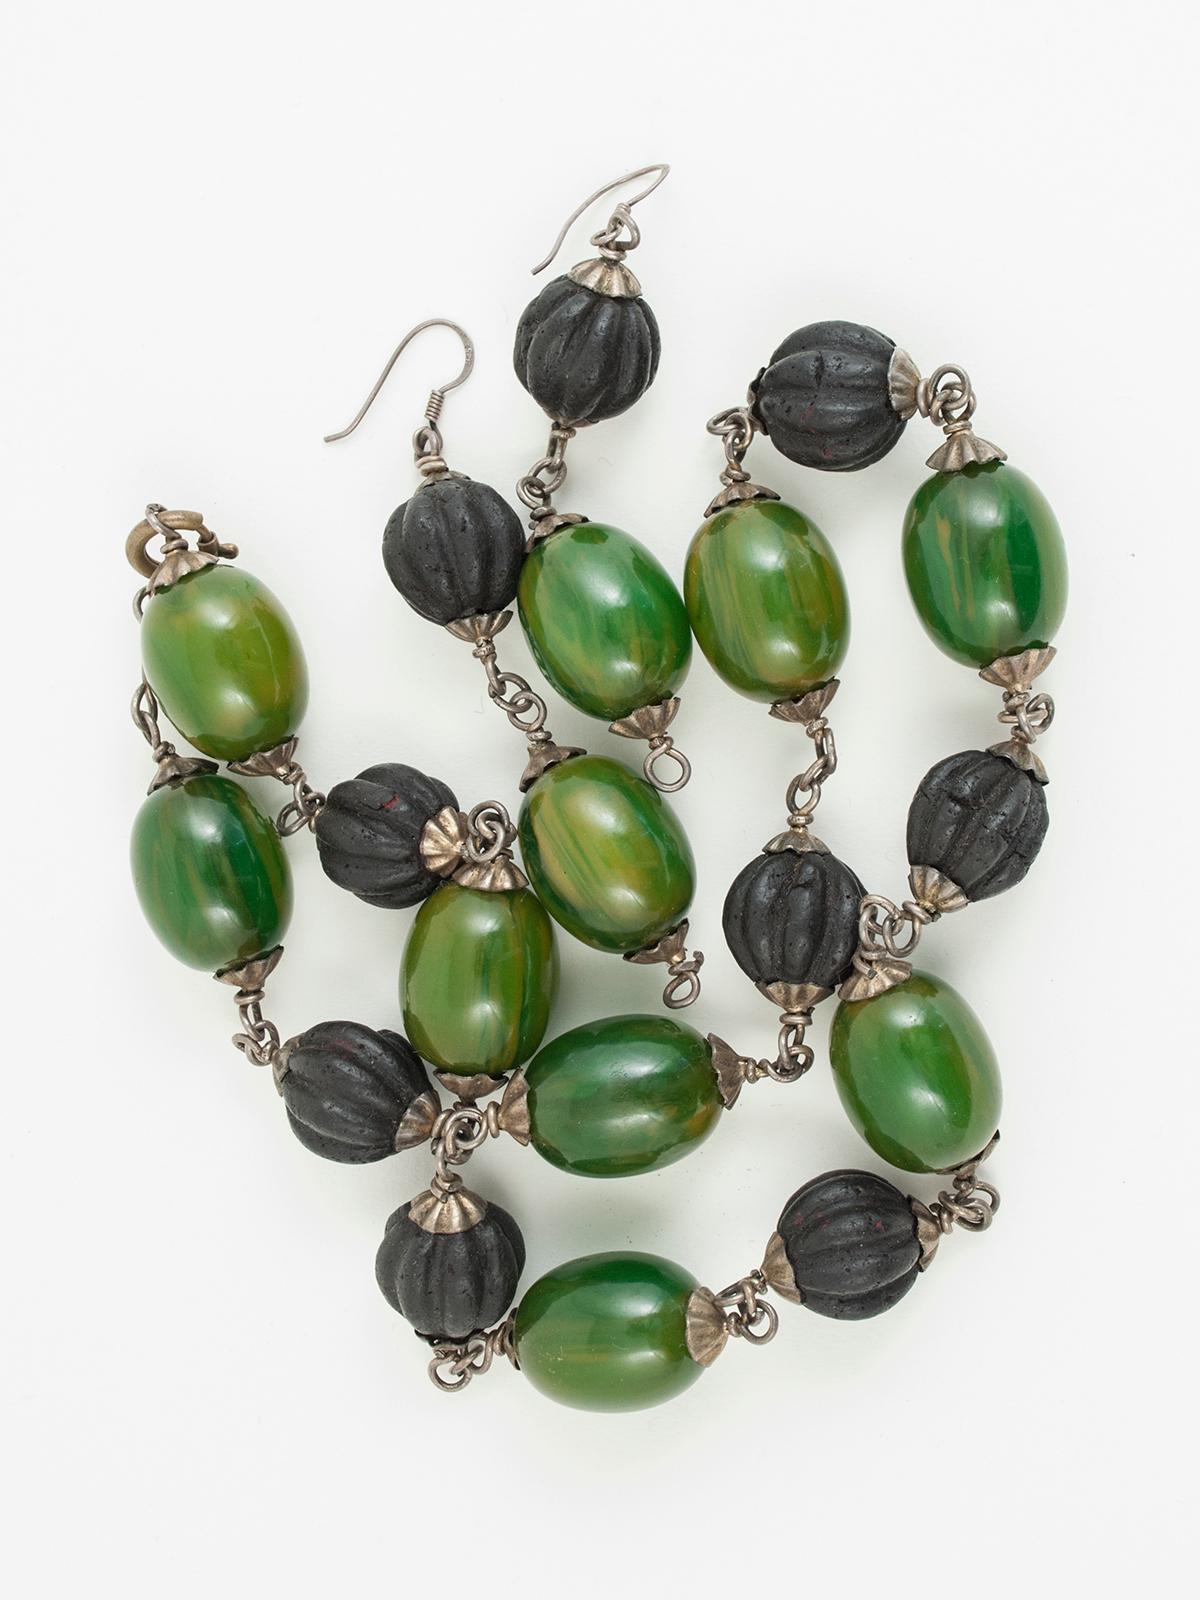 Mid-20th century Bakelite and amber paste bead necklace and earrings, Tunisia

A vintage necklace and earring set made of green/yellow bakelite beads, which are known as 'faturan', and melon-shaped beads created from amber paste; there is a very